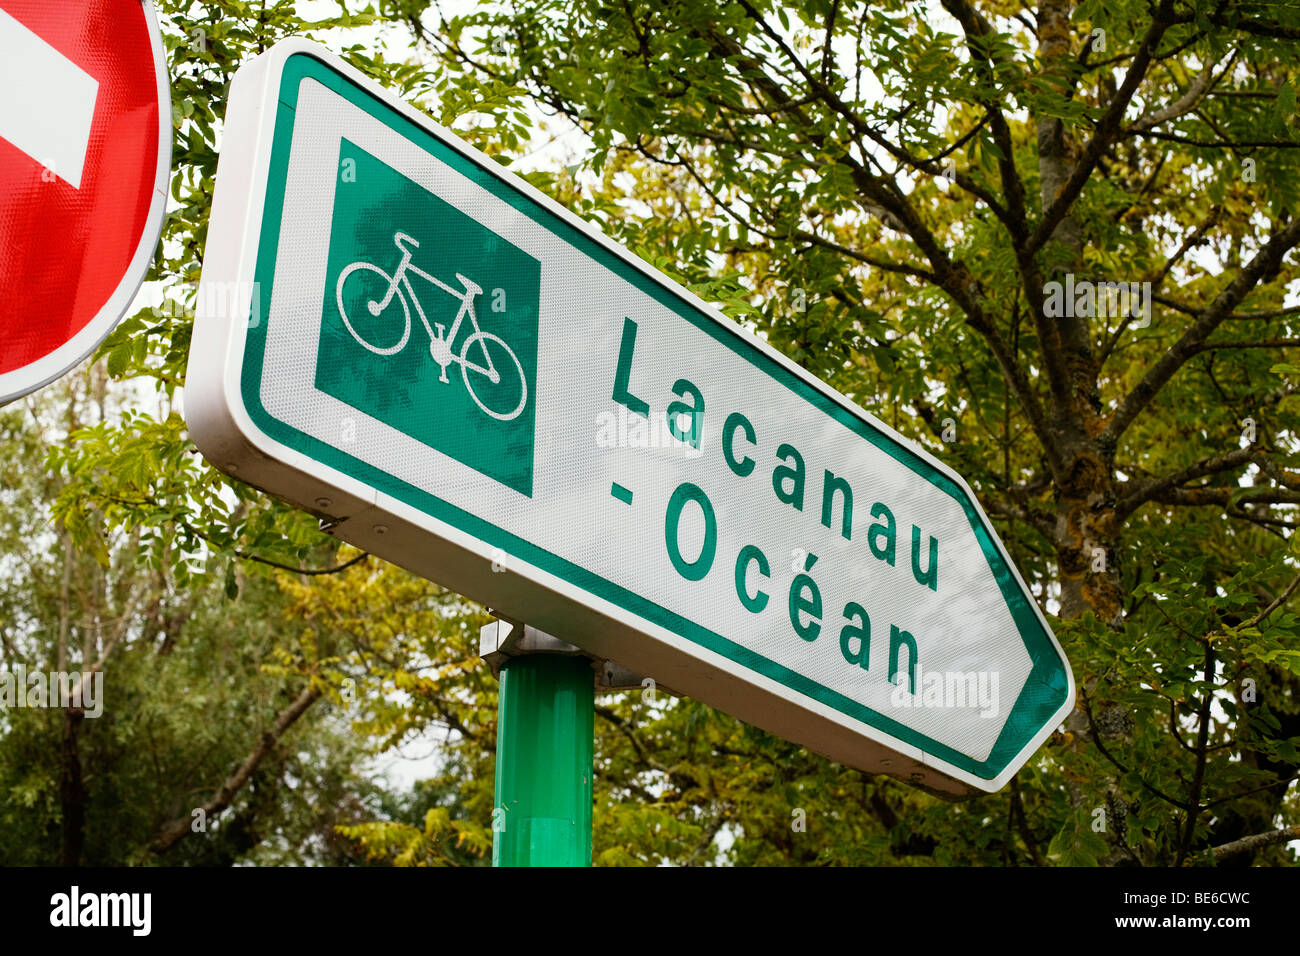 Cycle route sign for Lacanau Ocean on the south west Atlantic coast of France in the Bordeaux region Stock Photo